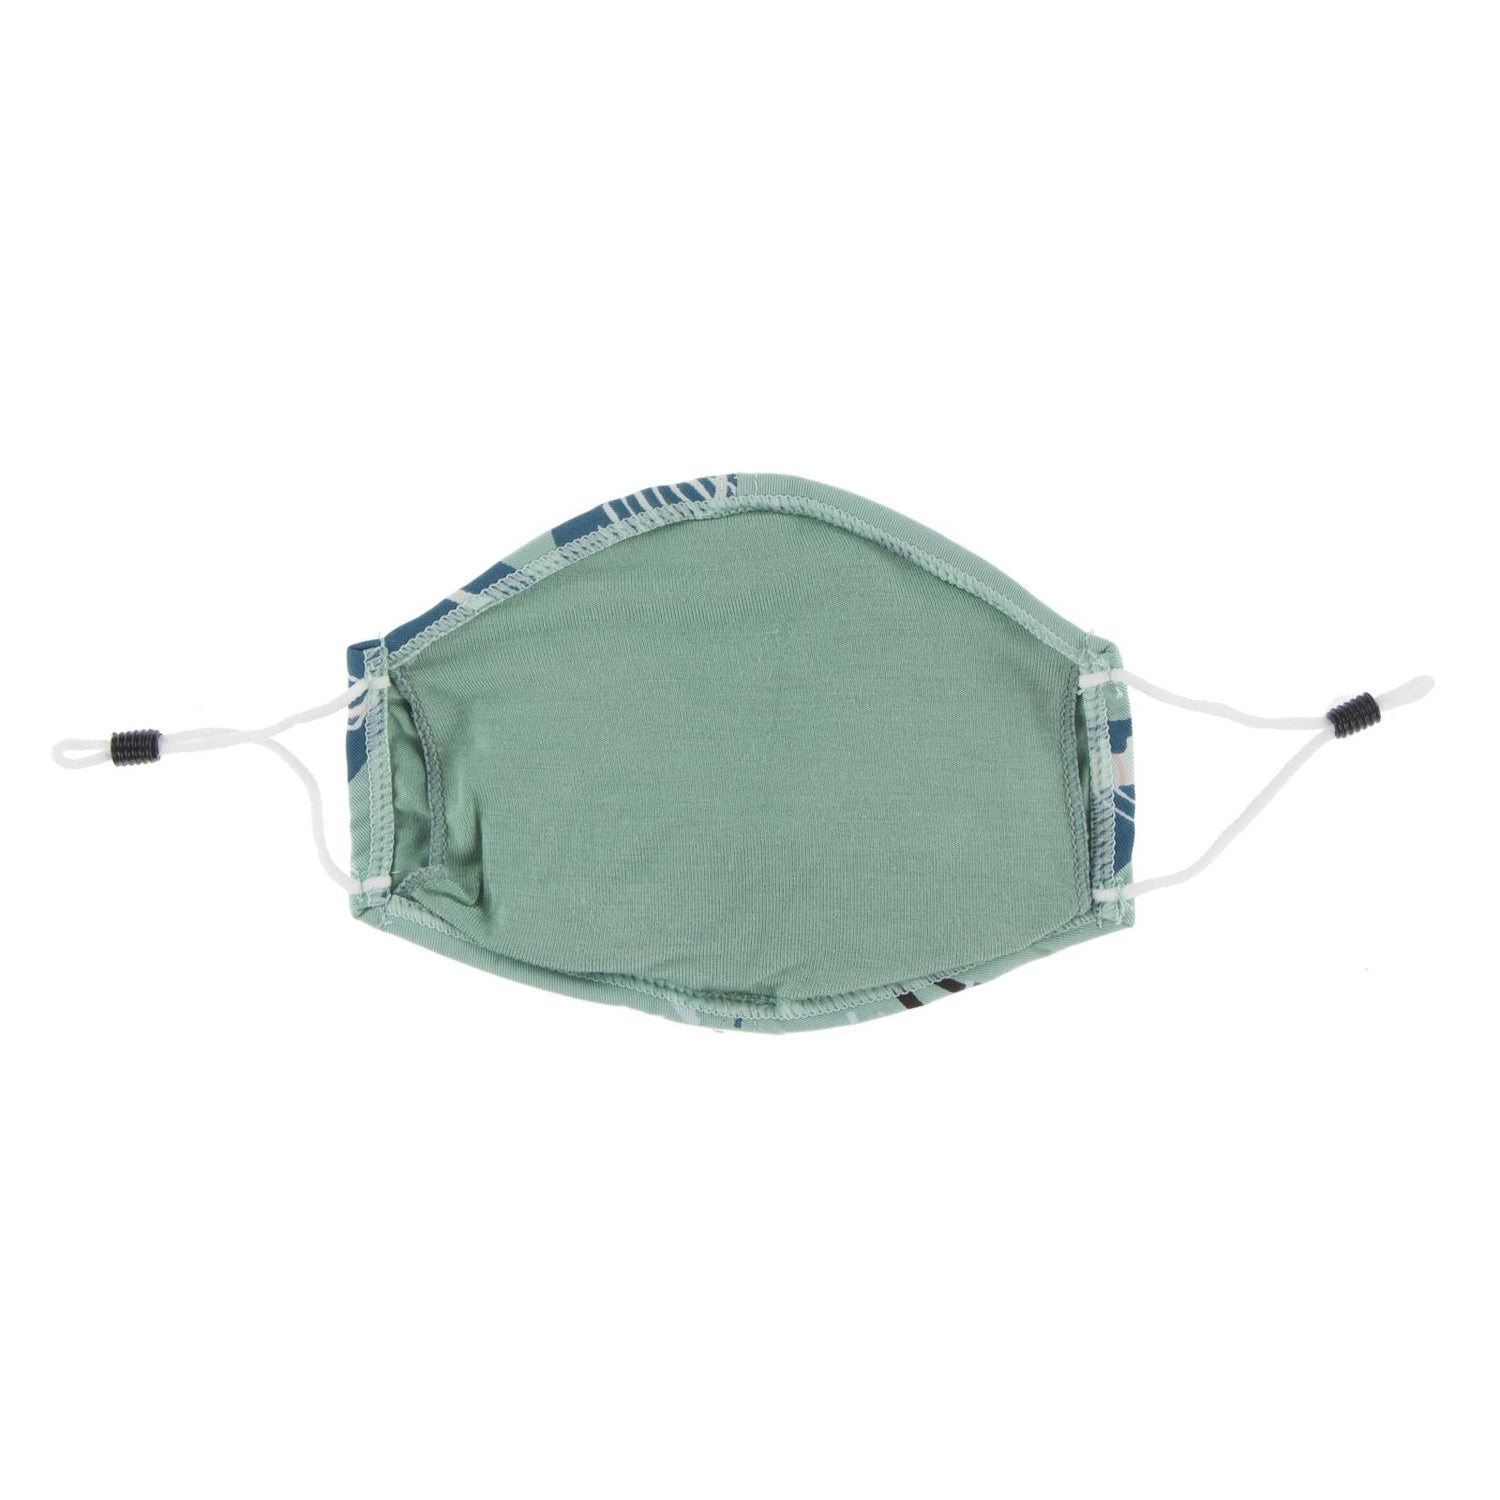 Print Waterproof Mask with Covered Vent and Filter for Kids in Shore T-Rex Dig